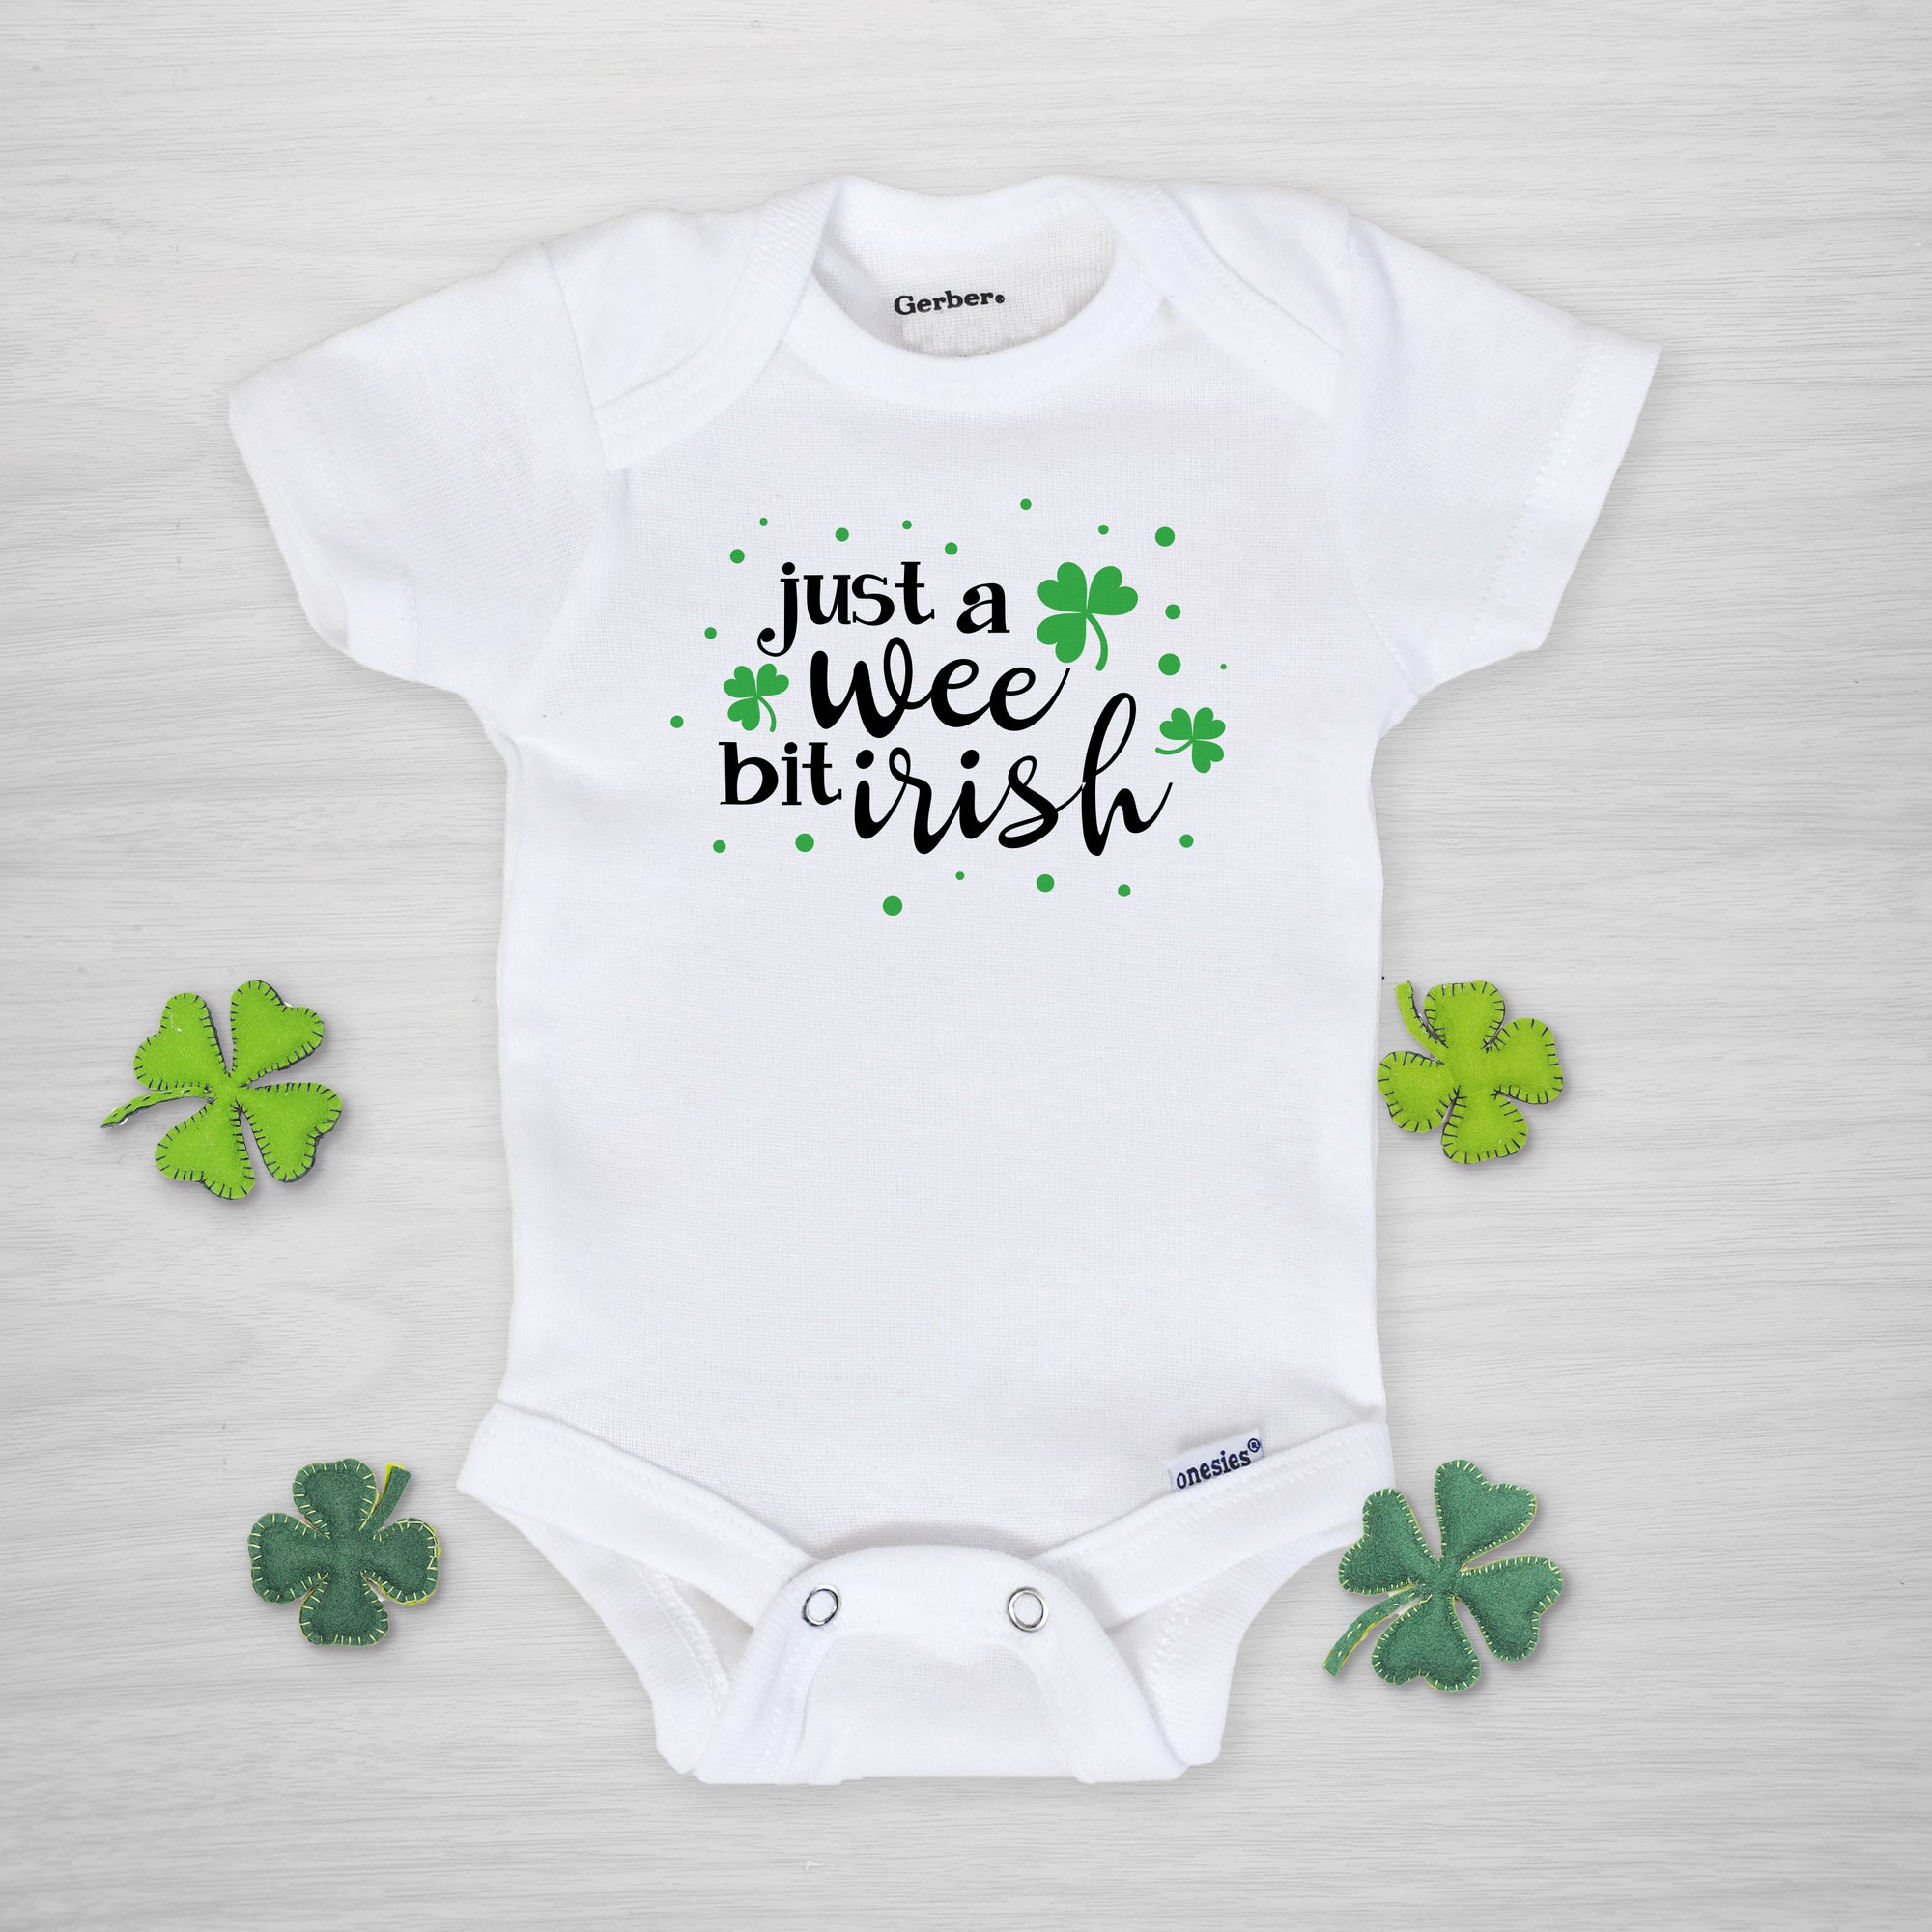 Just a Wee Bit Irish Gerber Onesie for St. Patrick's Day, short sleeved